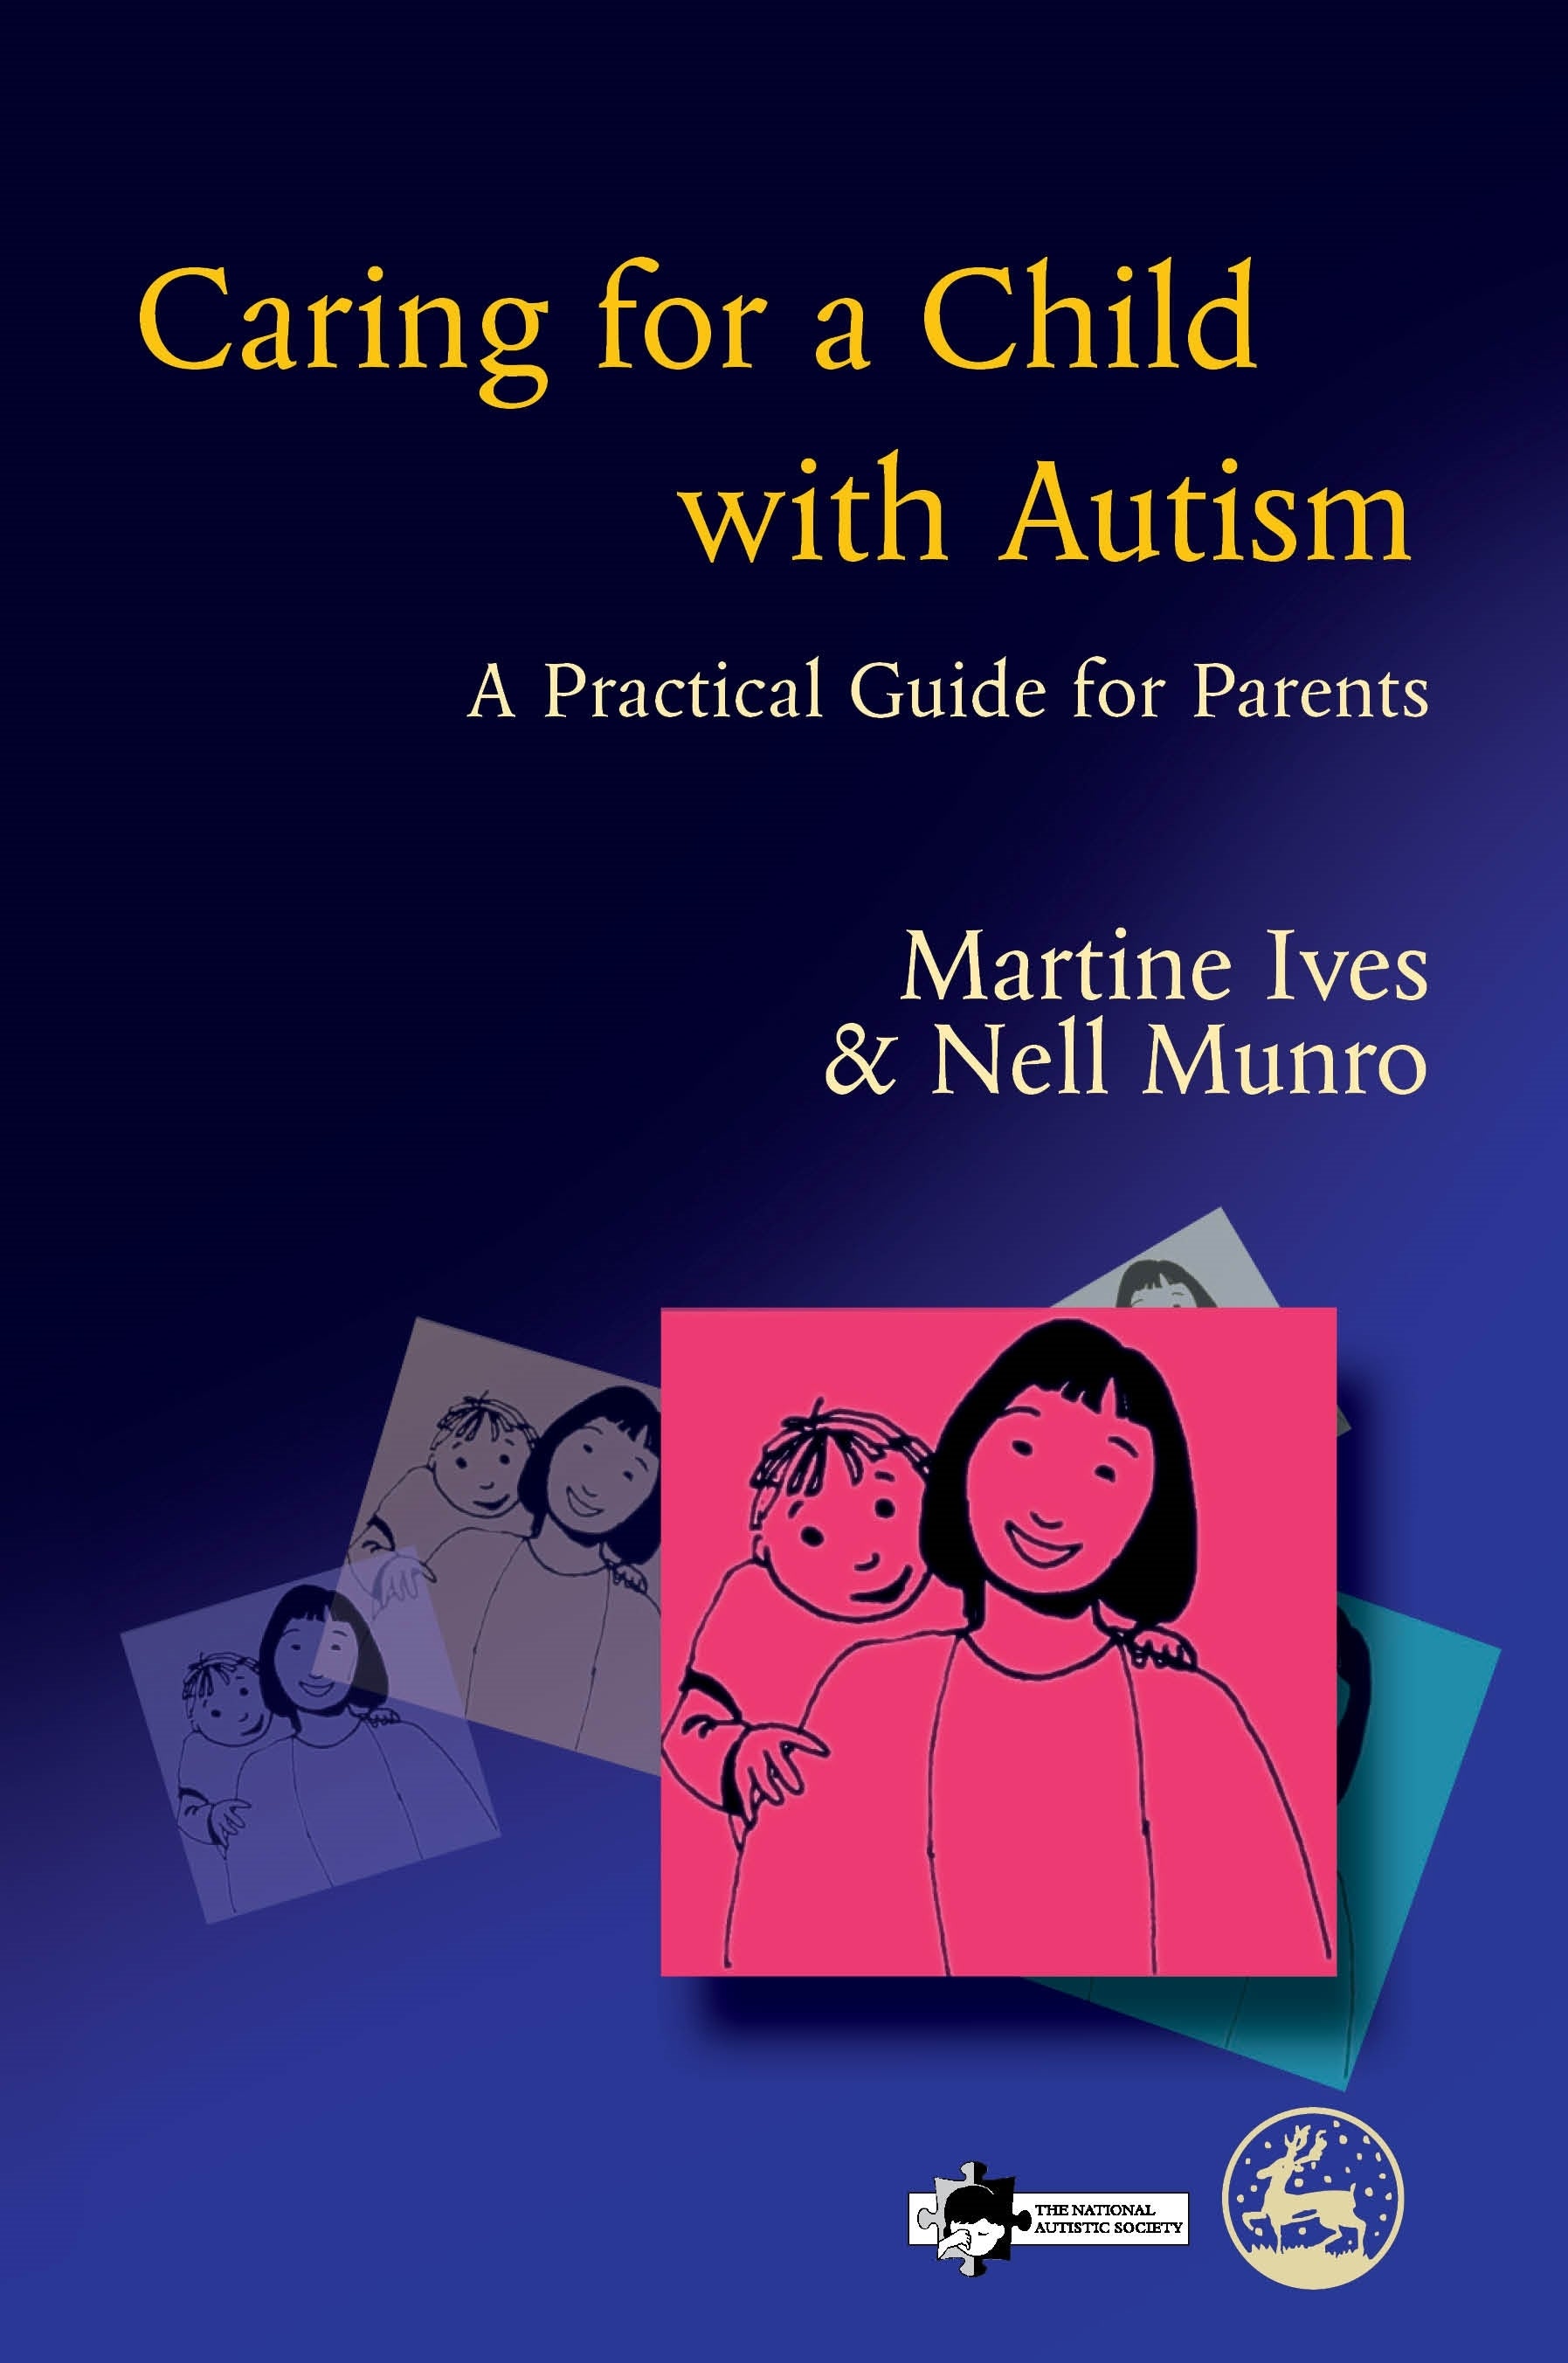 Caring for a Child with Autism by Nell Munro, Martine Ives, Richard Wynn